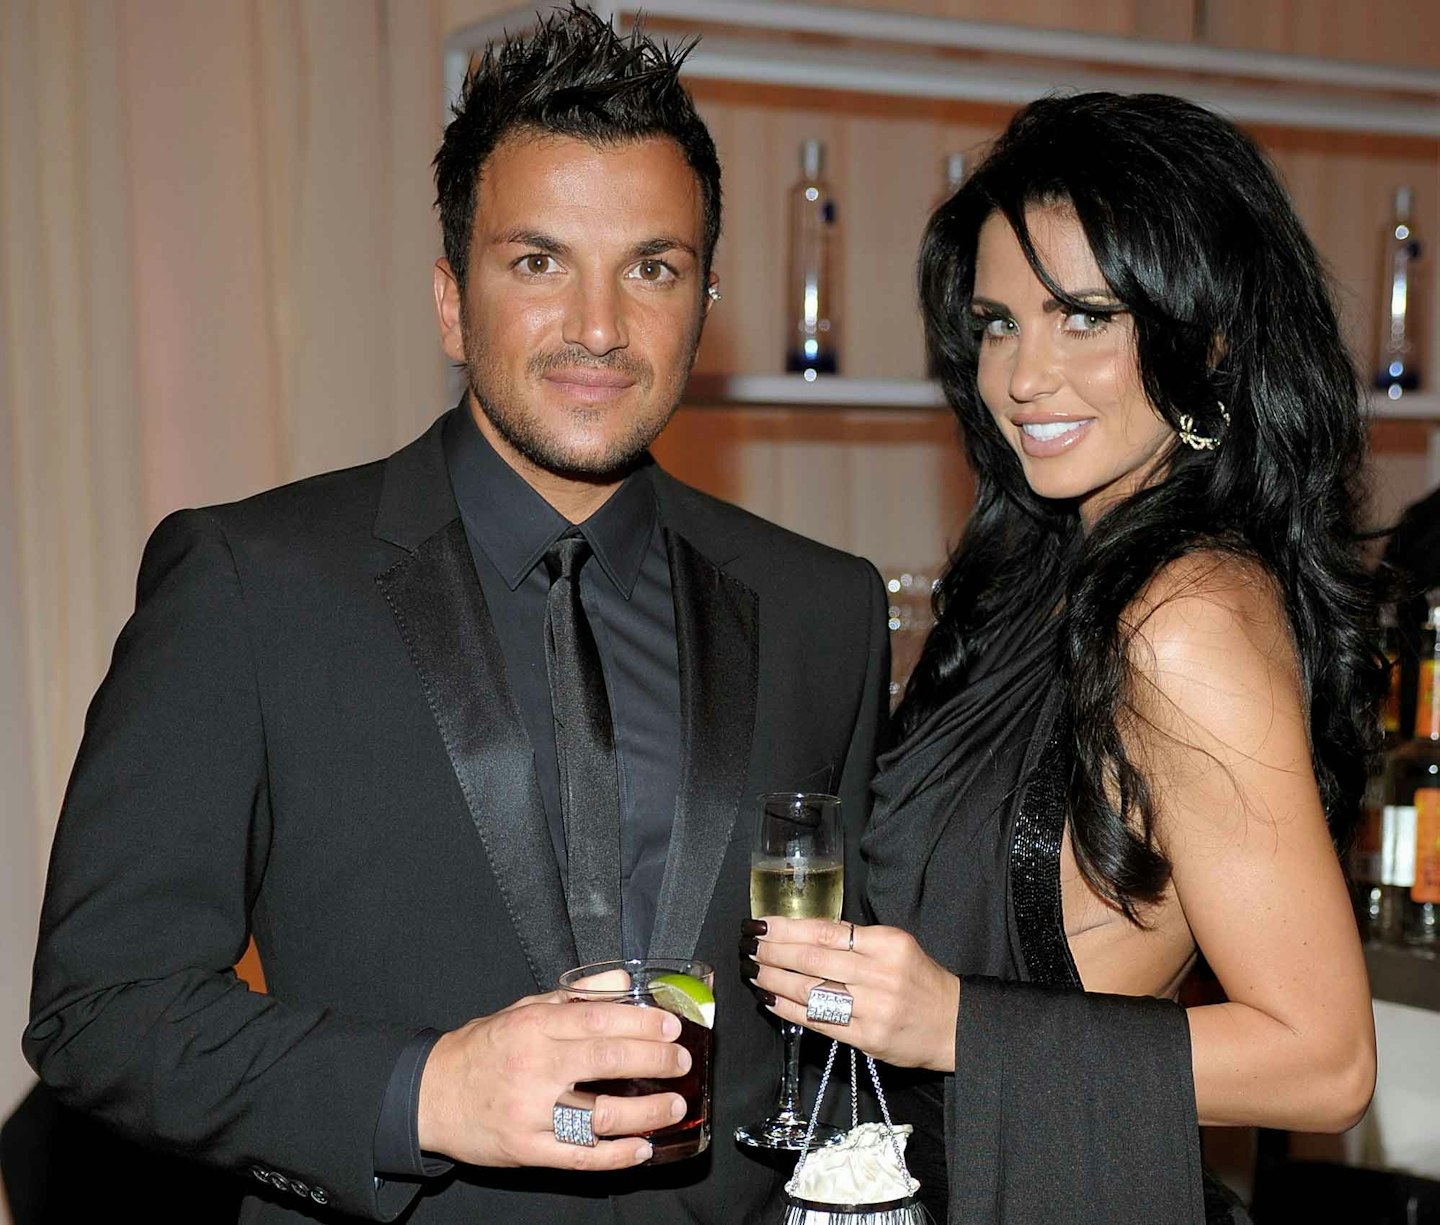 Peter Andre and Katie Price drinking